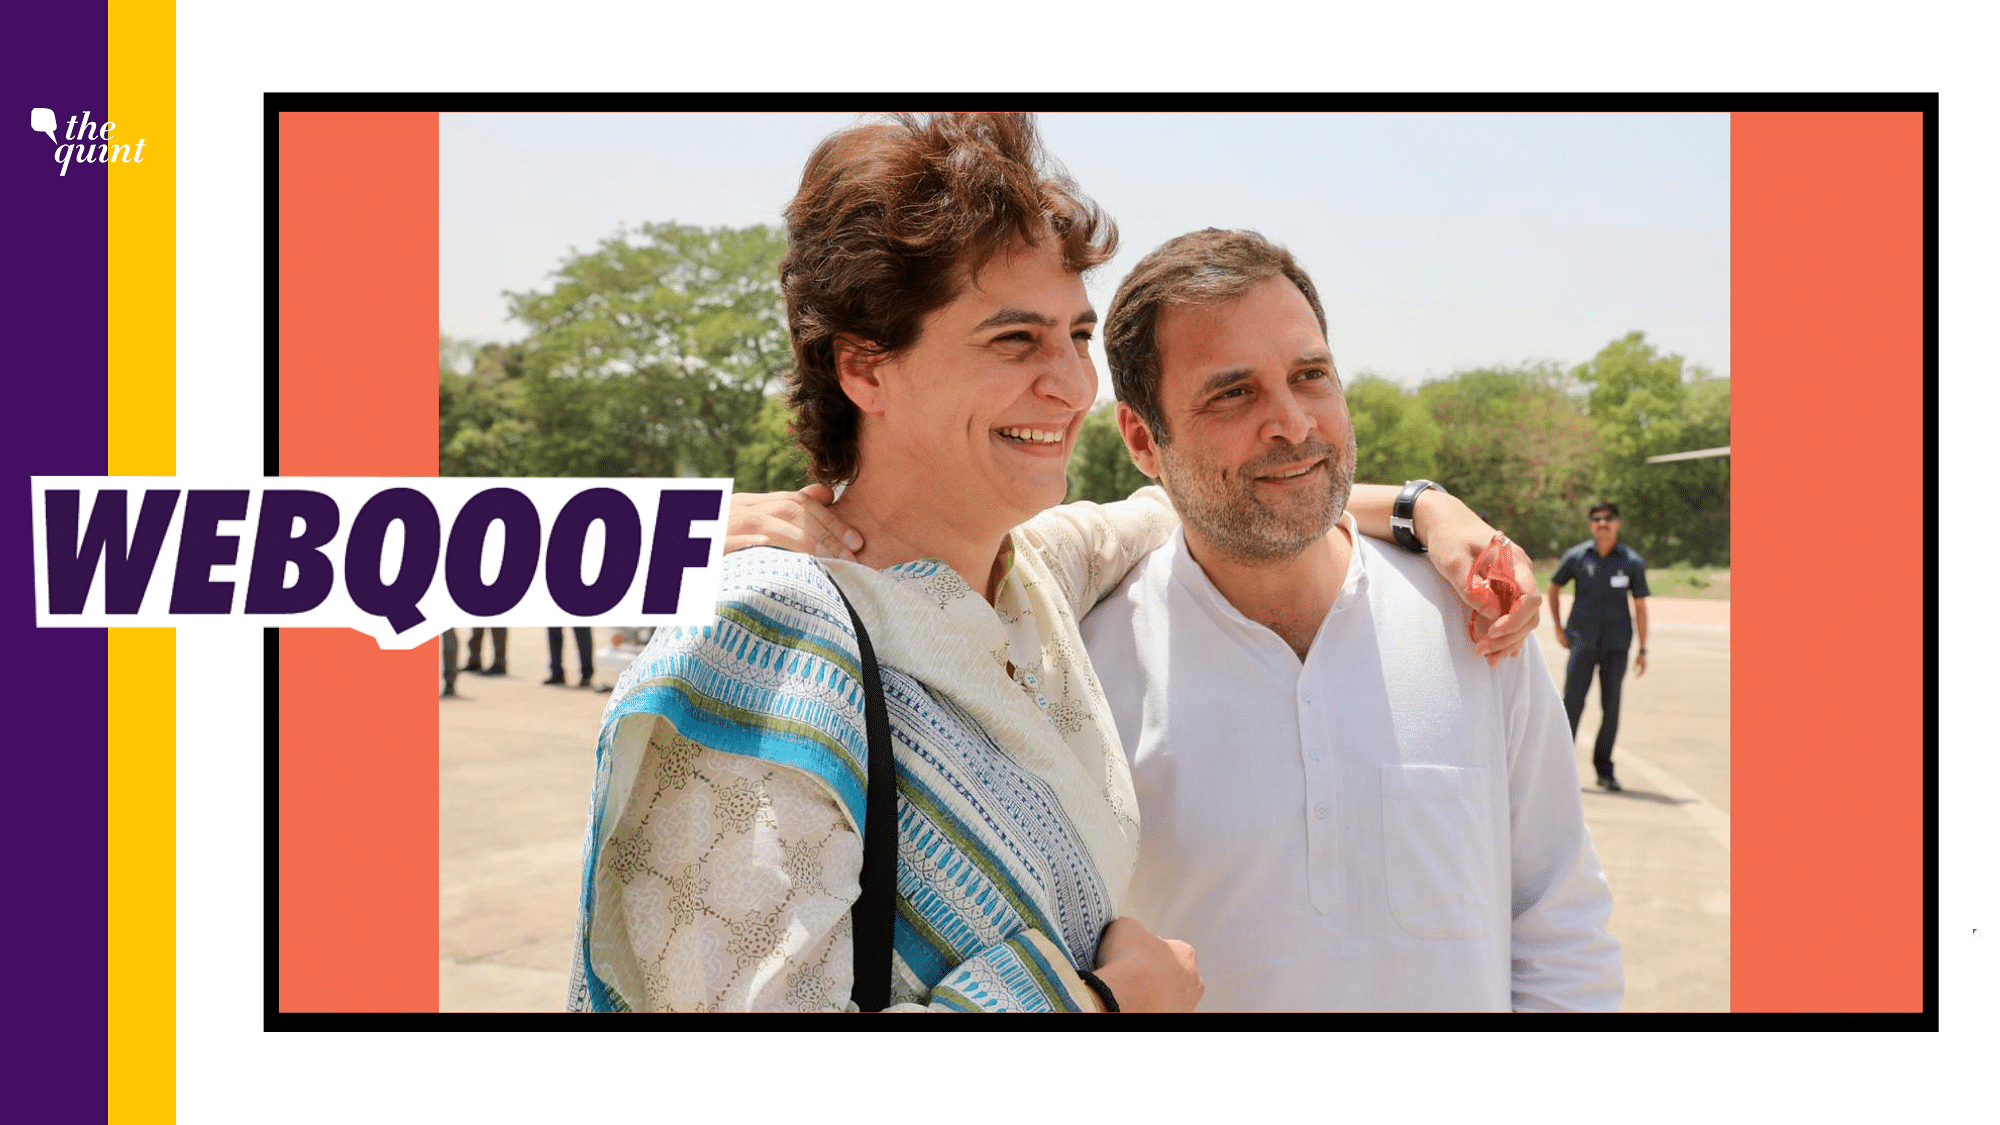 The viral image is actually from 2019, when Rahul and Priyanka Gandhi were on their campaign trail during the Lok Sabha Elections.